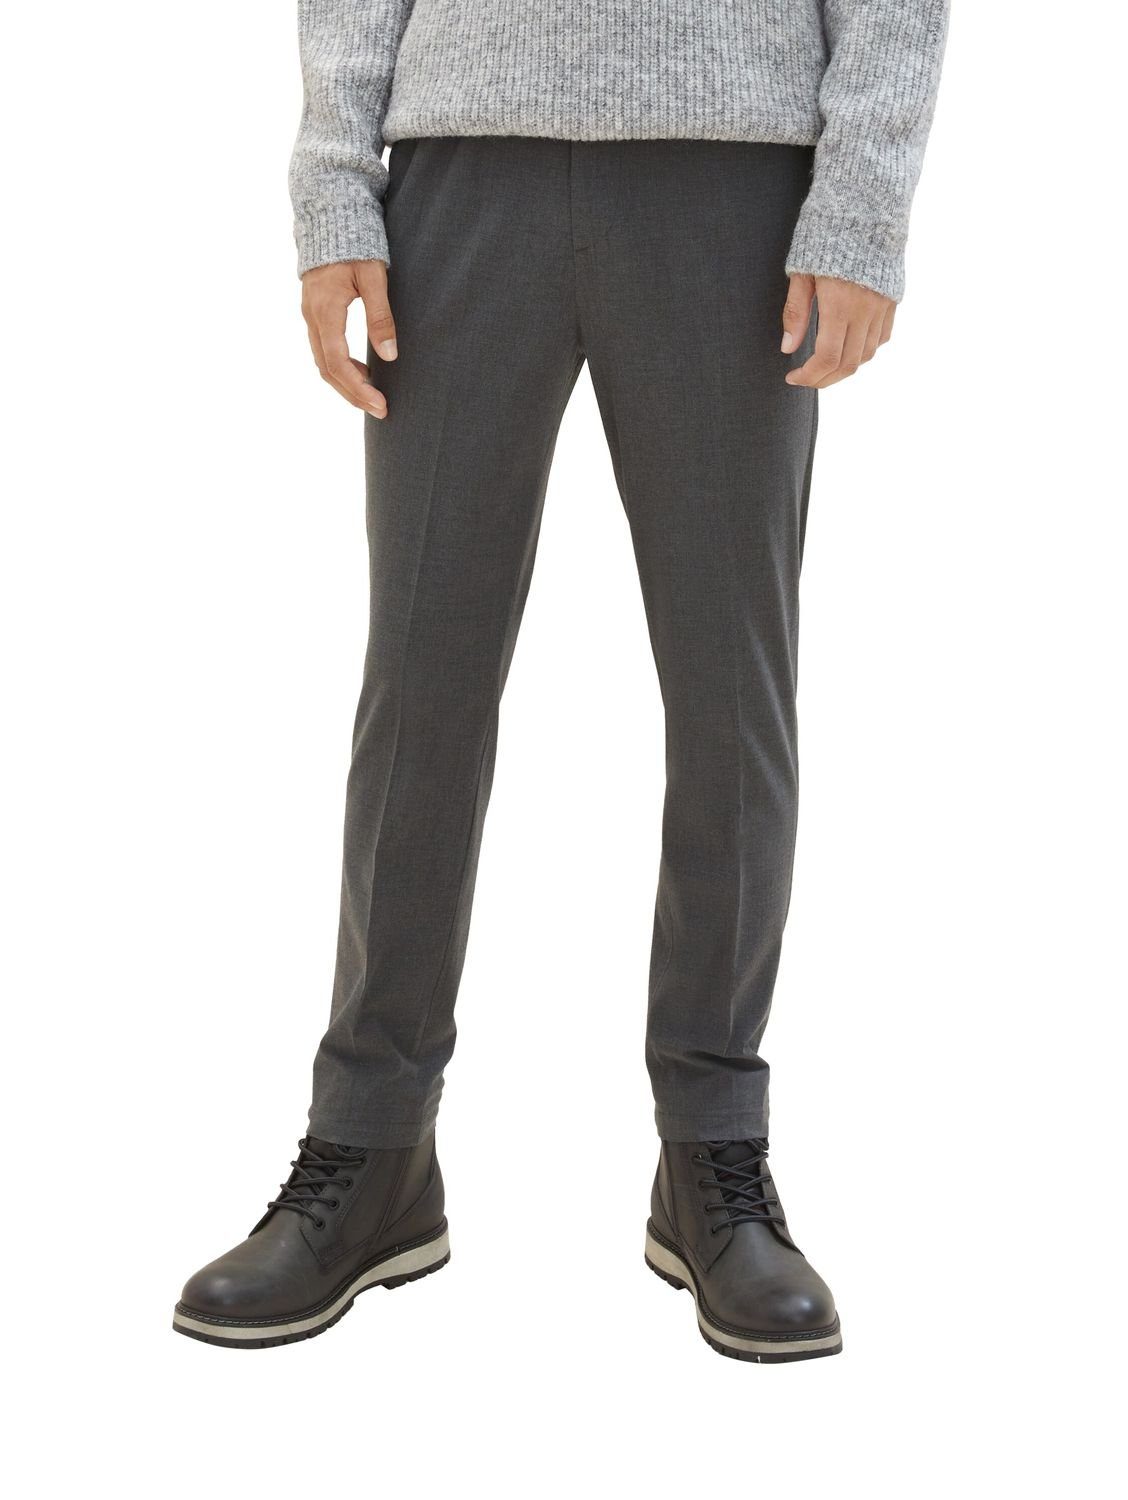 RELAXED Stretch Melange Mid mit Grey TOM CHINO Denim 10775 TAILOR Chinohose TAPERED